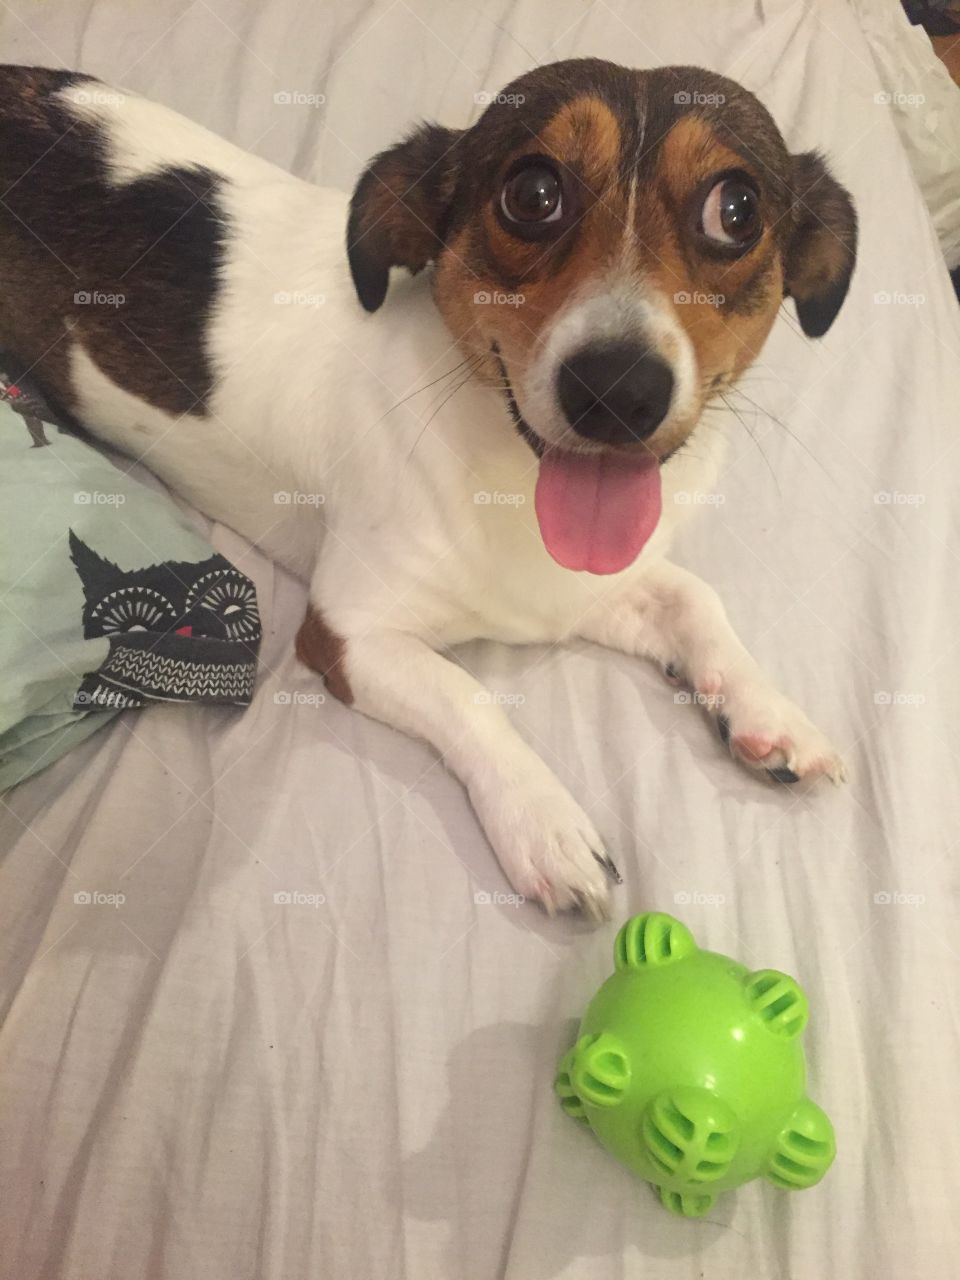 Cute smiling dog with a green ball on a bed